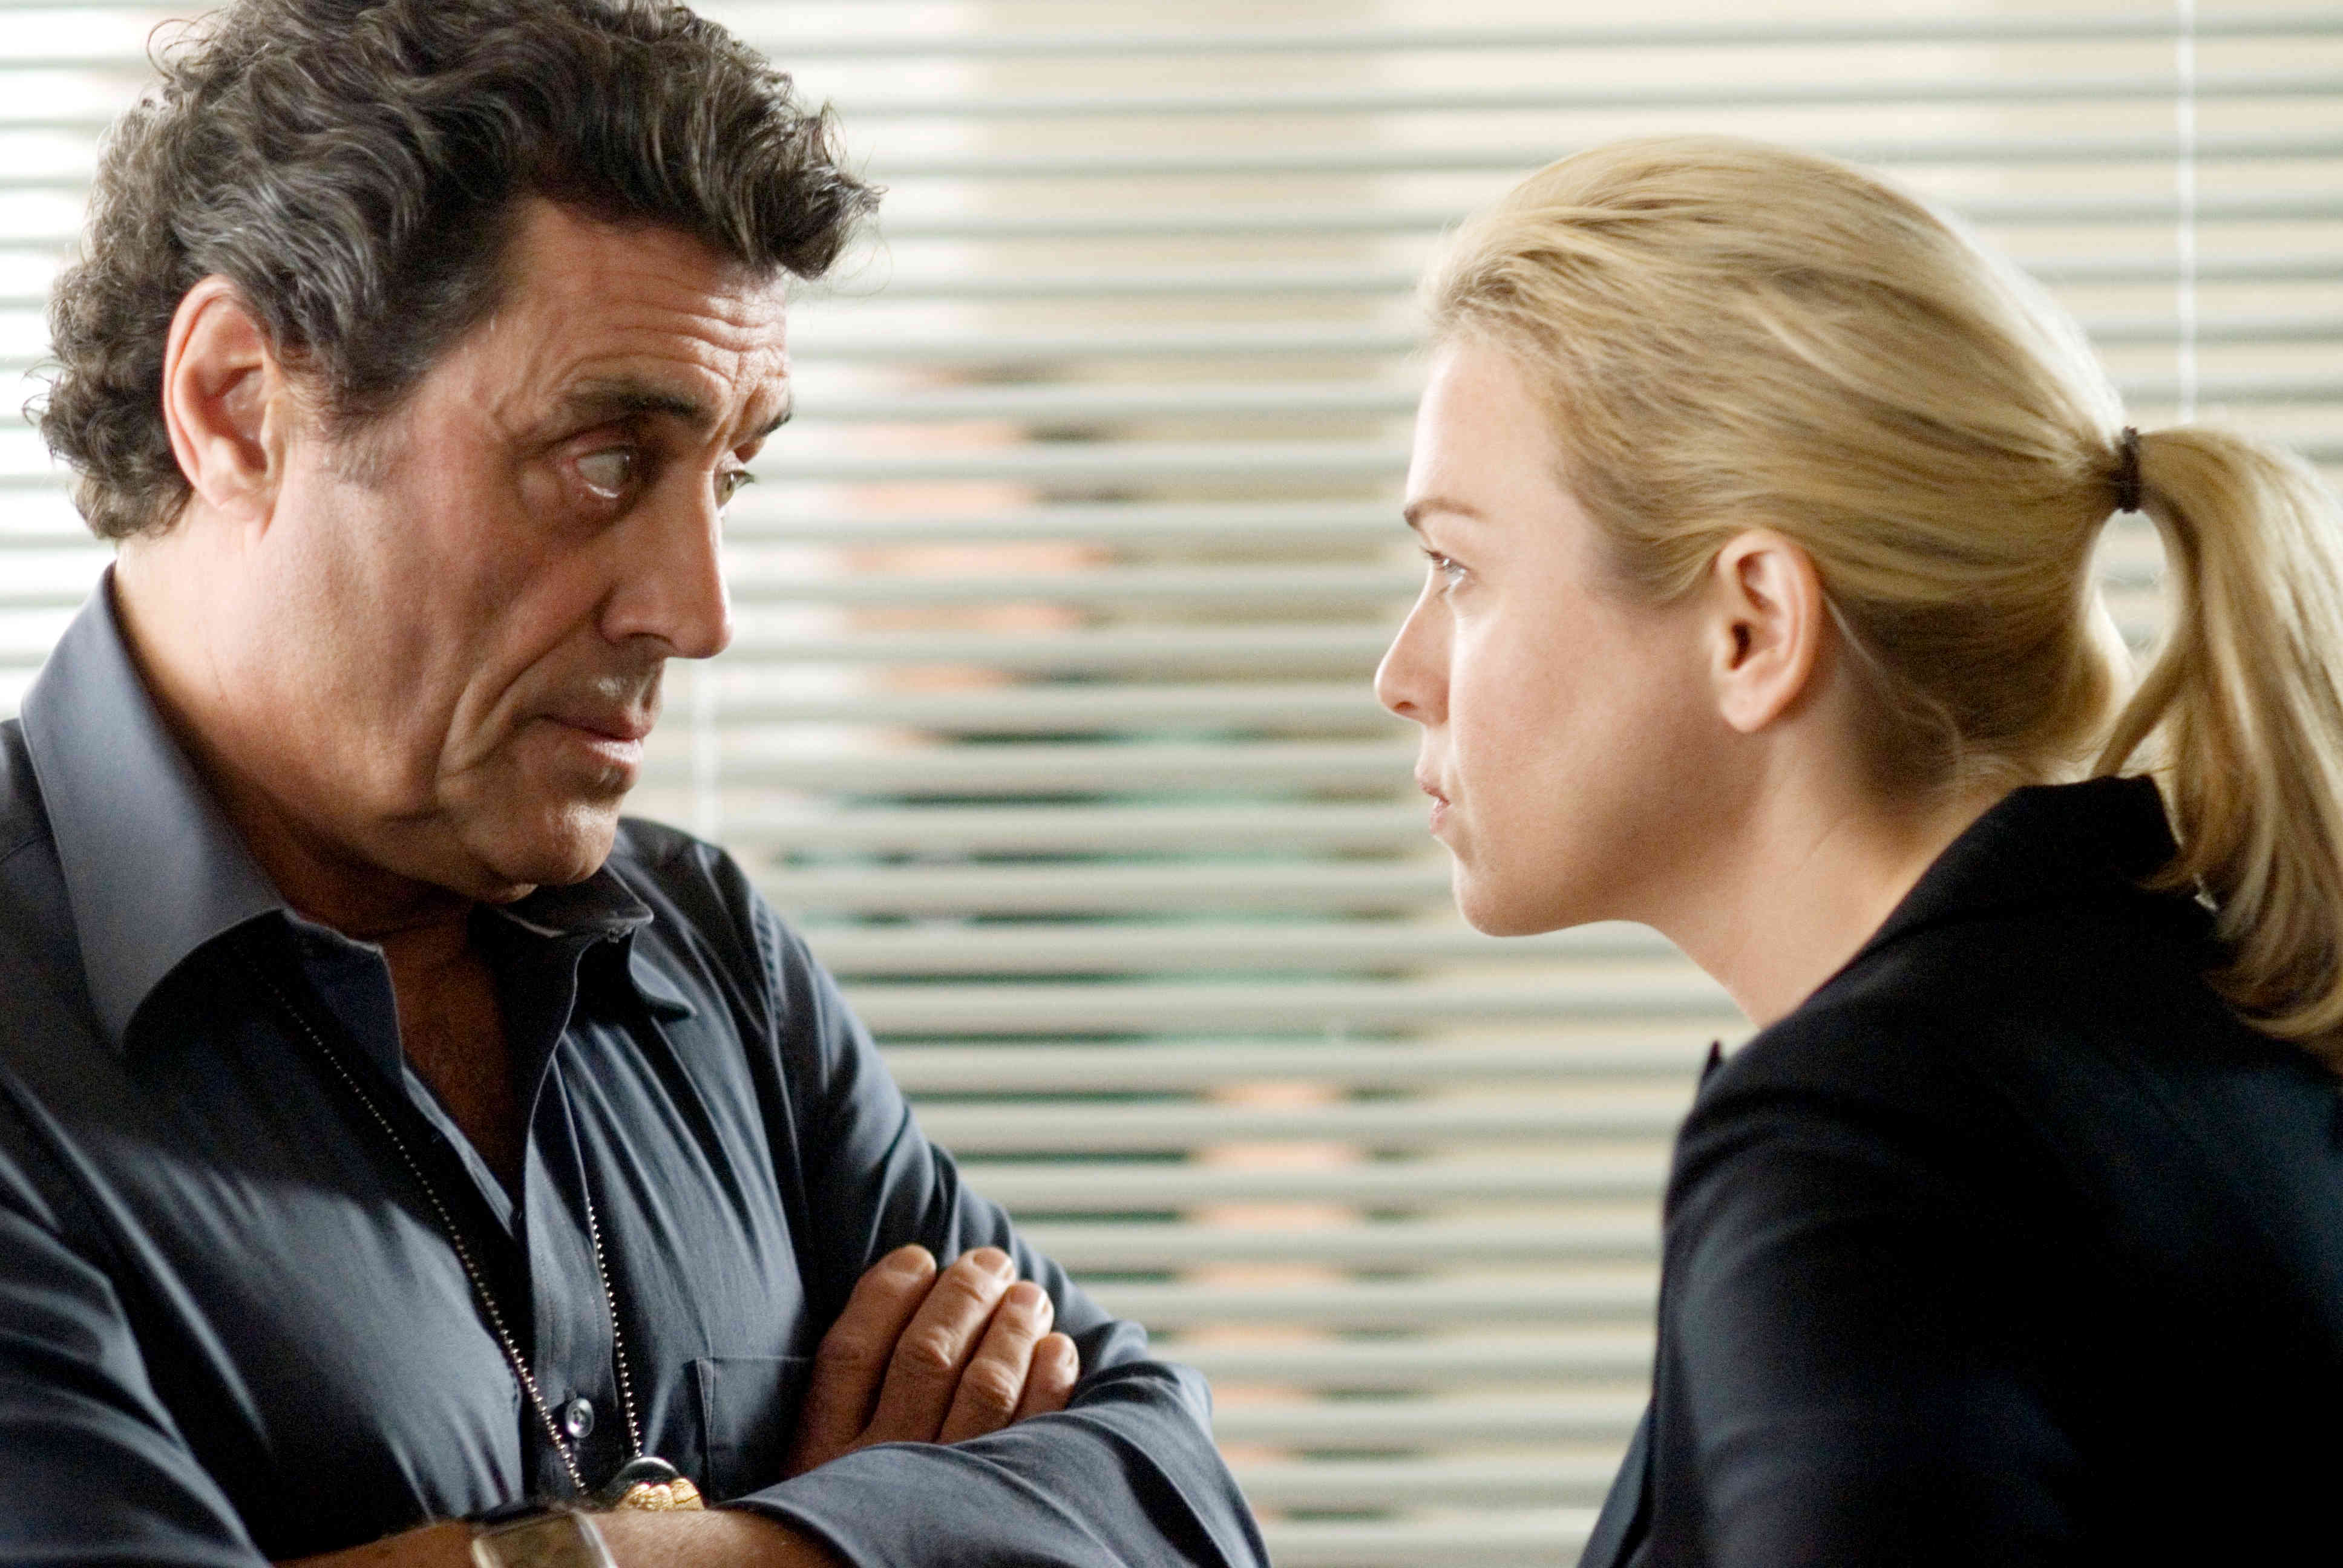 Ian McShane stars as Detective Mike Barron and Renee Zellweger stars as Emily Jenkins in Paramount Vantage's Case 39 (2010)